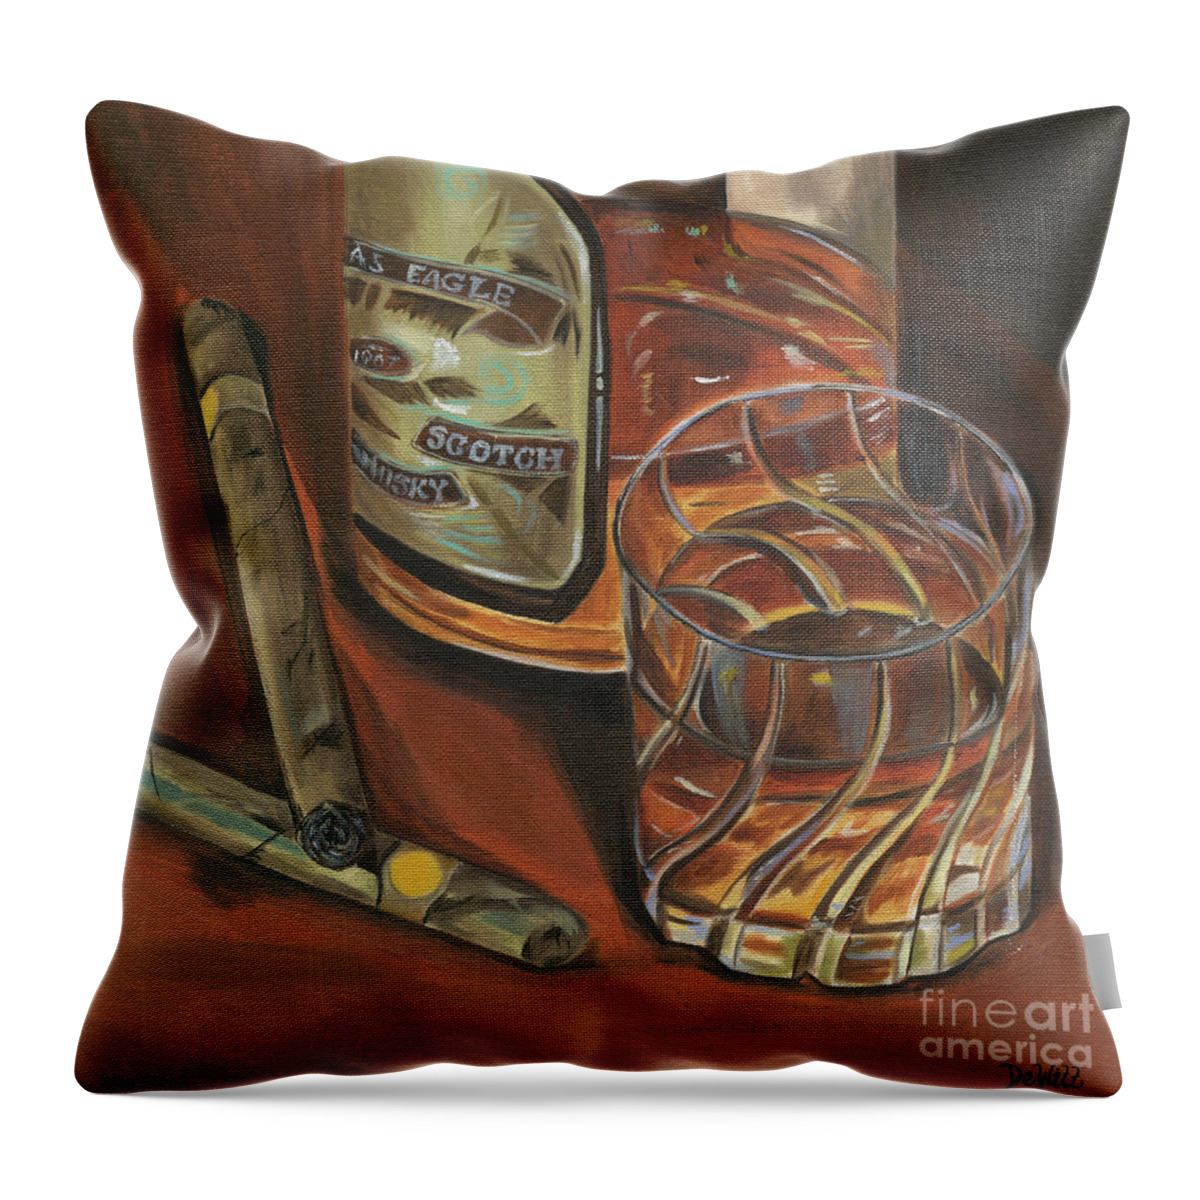 Scotch Throw Pillow featuring the painting Scotch and Cigars 3 by Debbie DeWitt